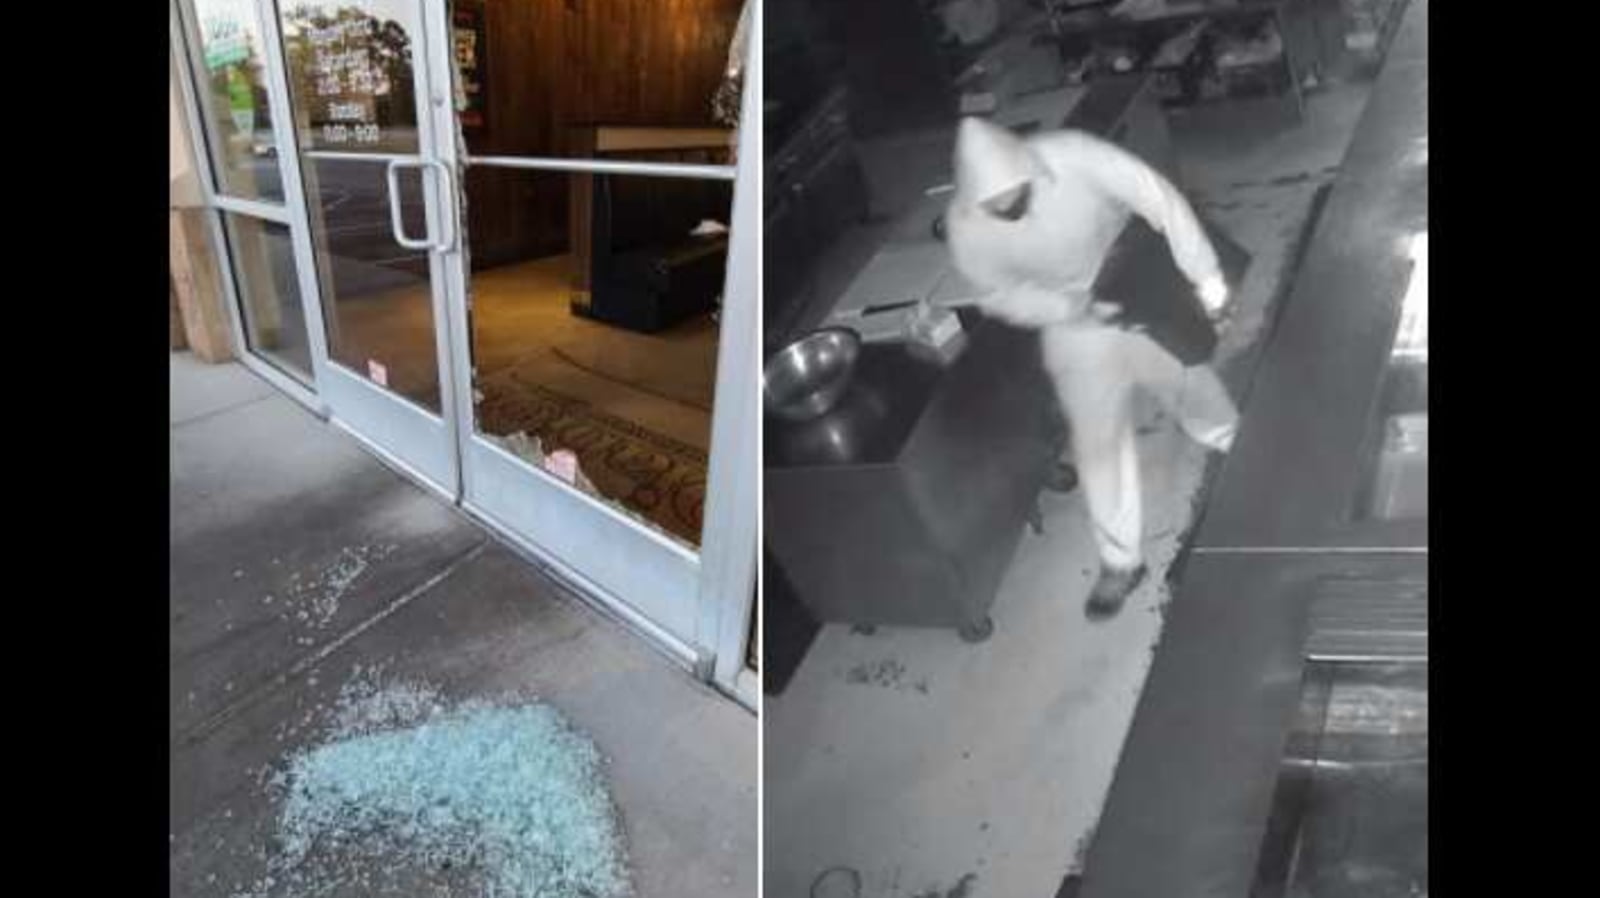 Owner offers job to man who broke into restaurant, wins praise from netizens